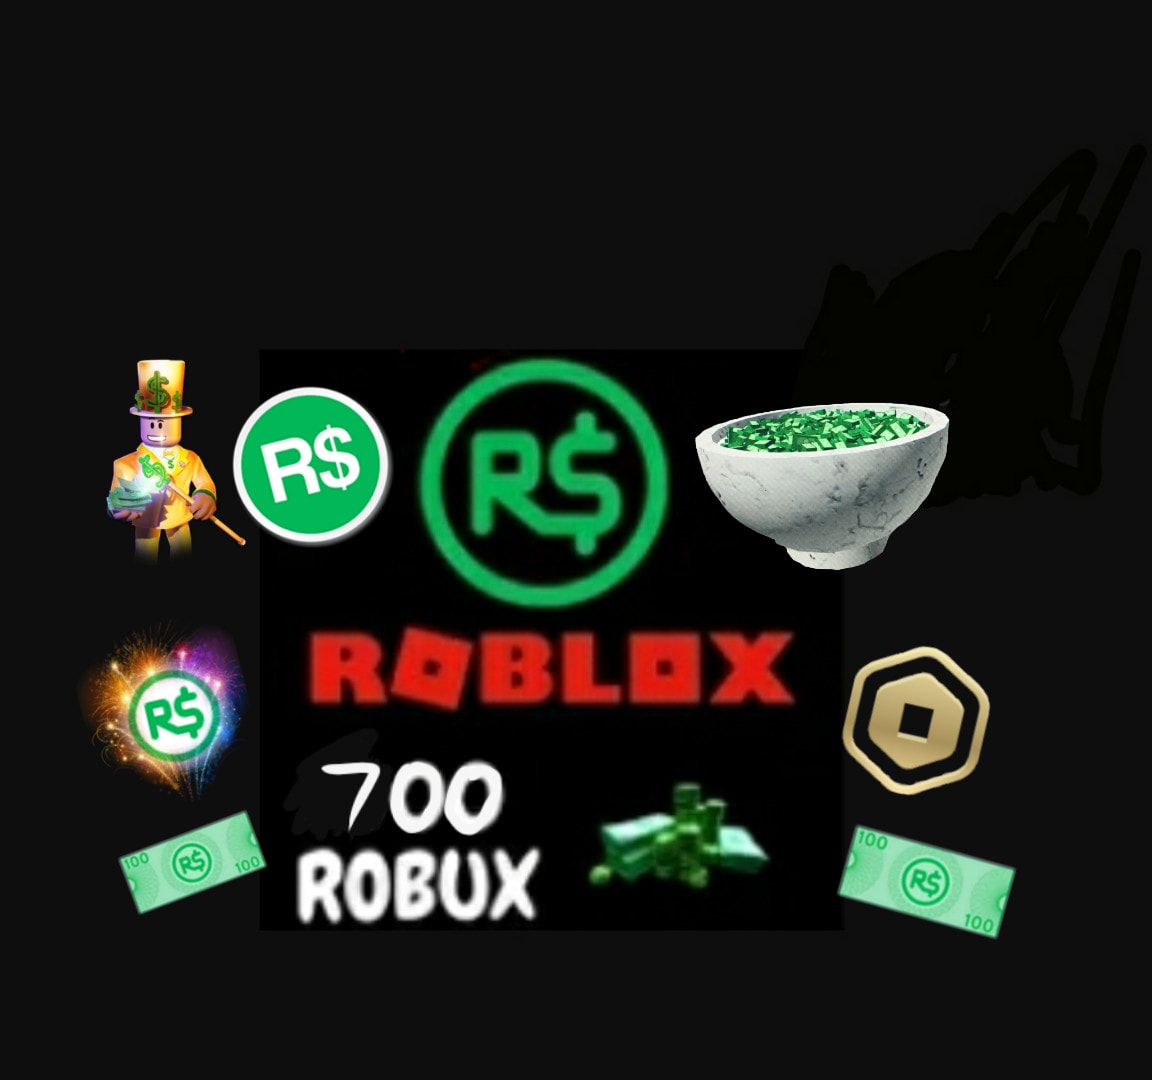 Sell You Robux For Cheaper By Texzzz - username www robux co how to get 700 robux